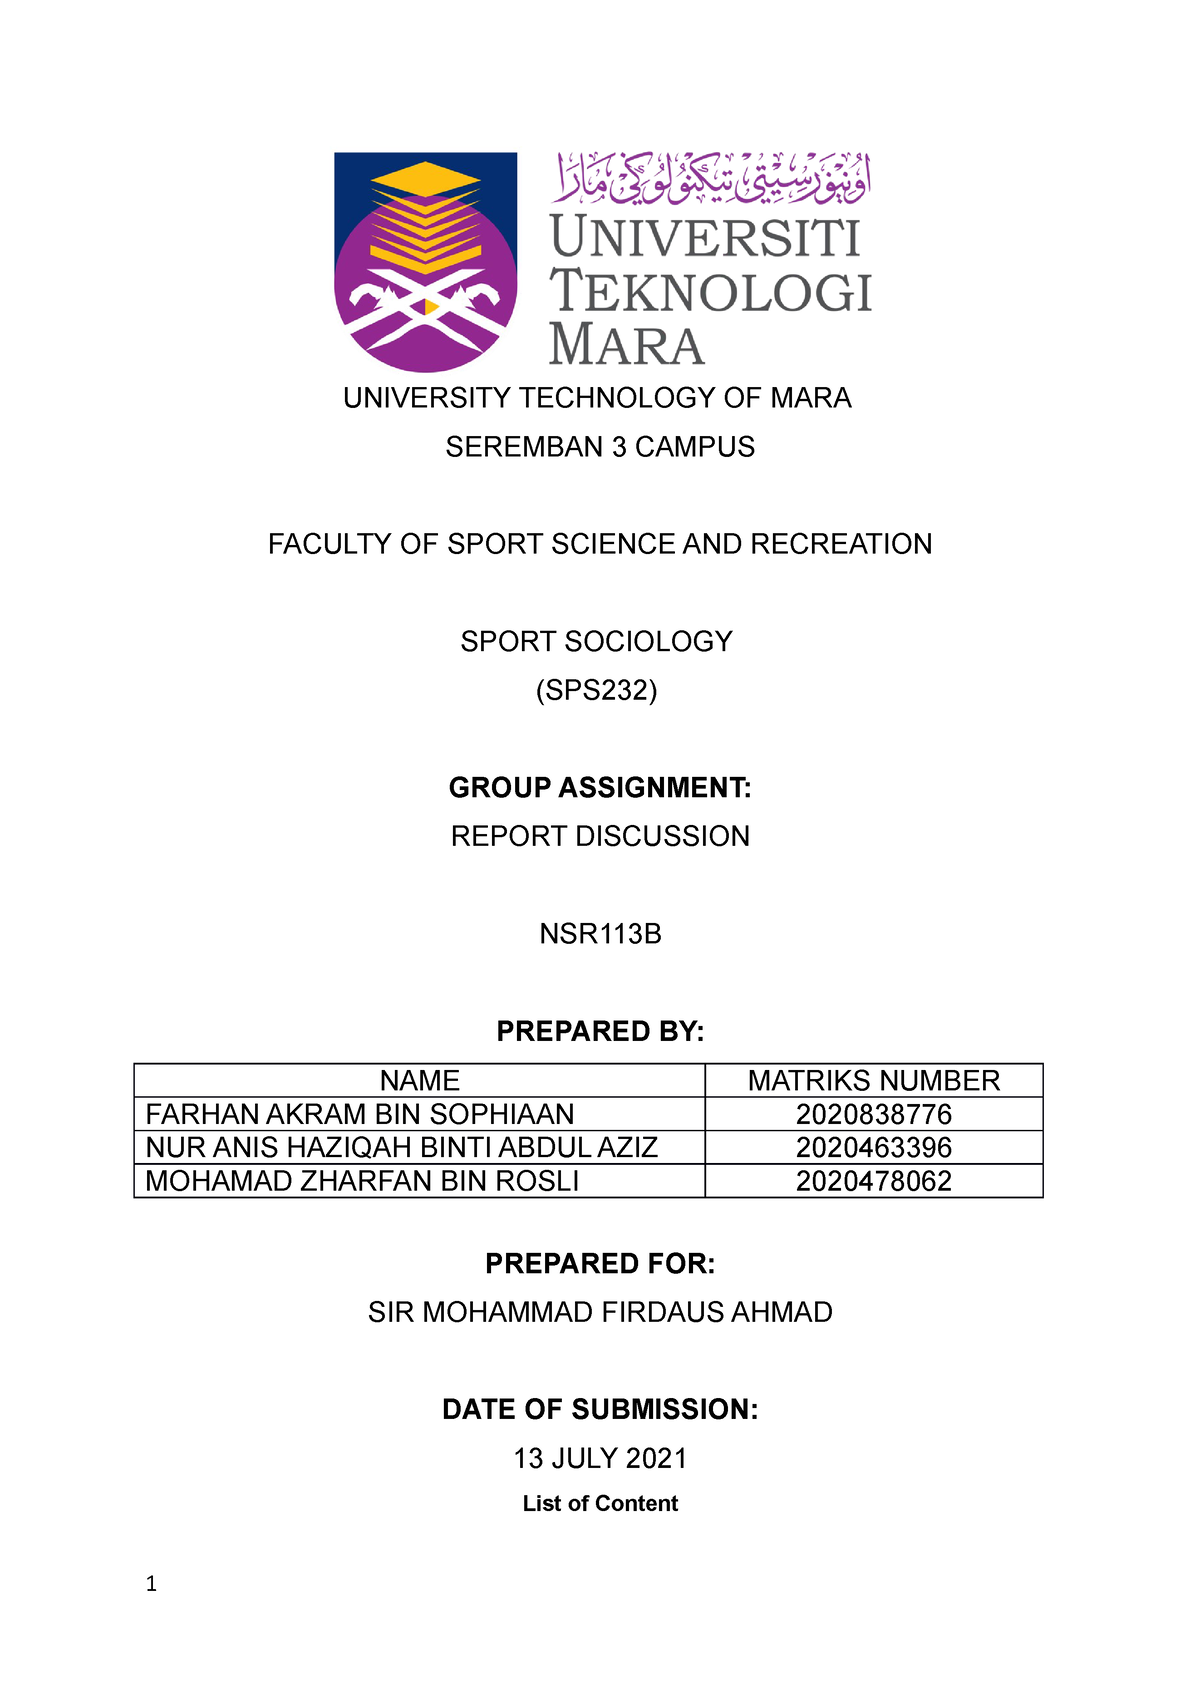 SPS 232 Group Assignment - UNIVERSITY TECHNOLOGY OF MARA SEREMBAN 3 CAMPUS FACULTY OF SPORT SCIENCE pic